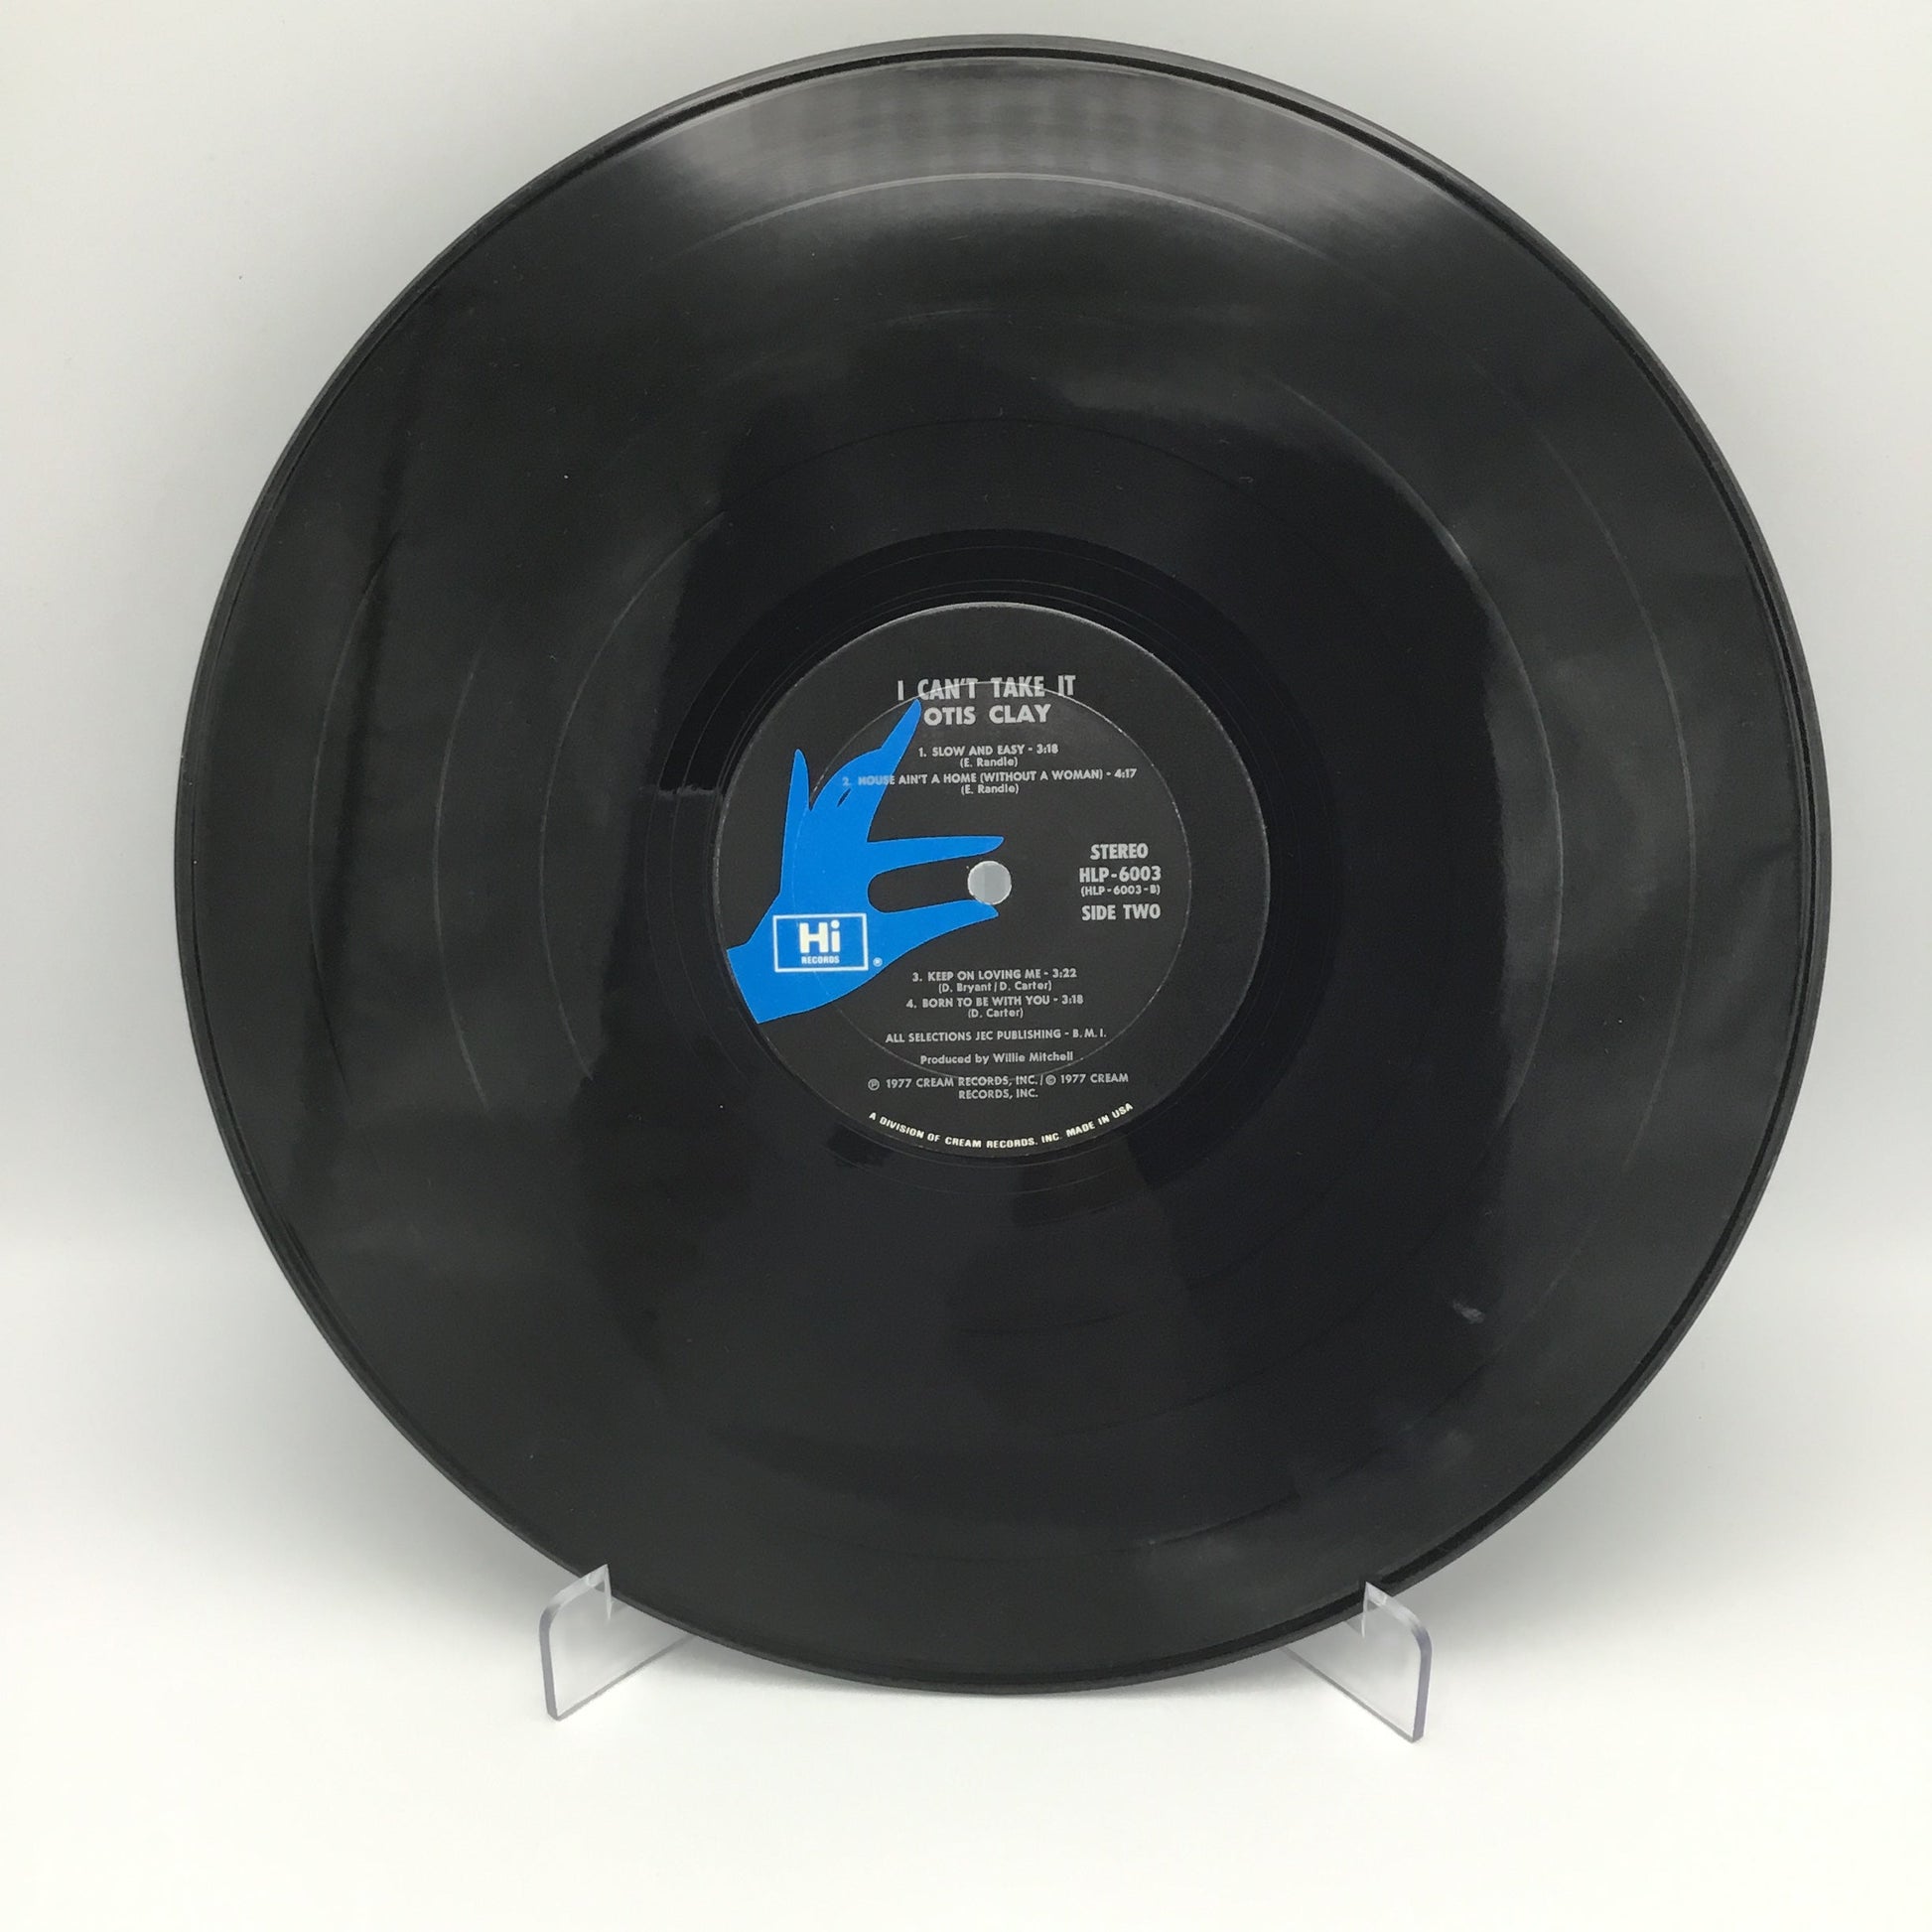 1977 I Can't Take It- by Otis Clay Vinyl - HI Records